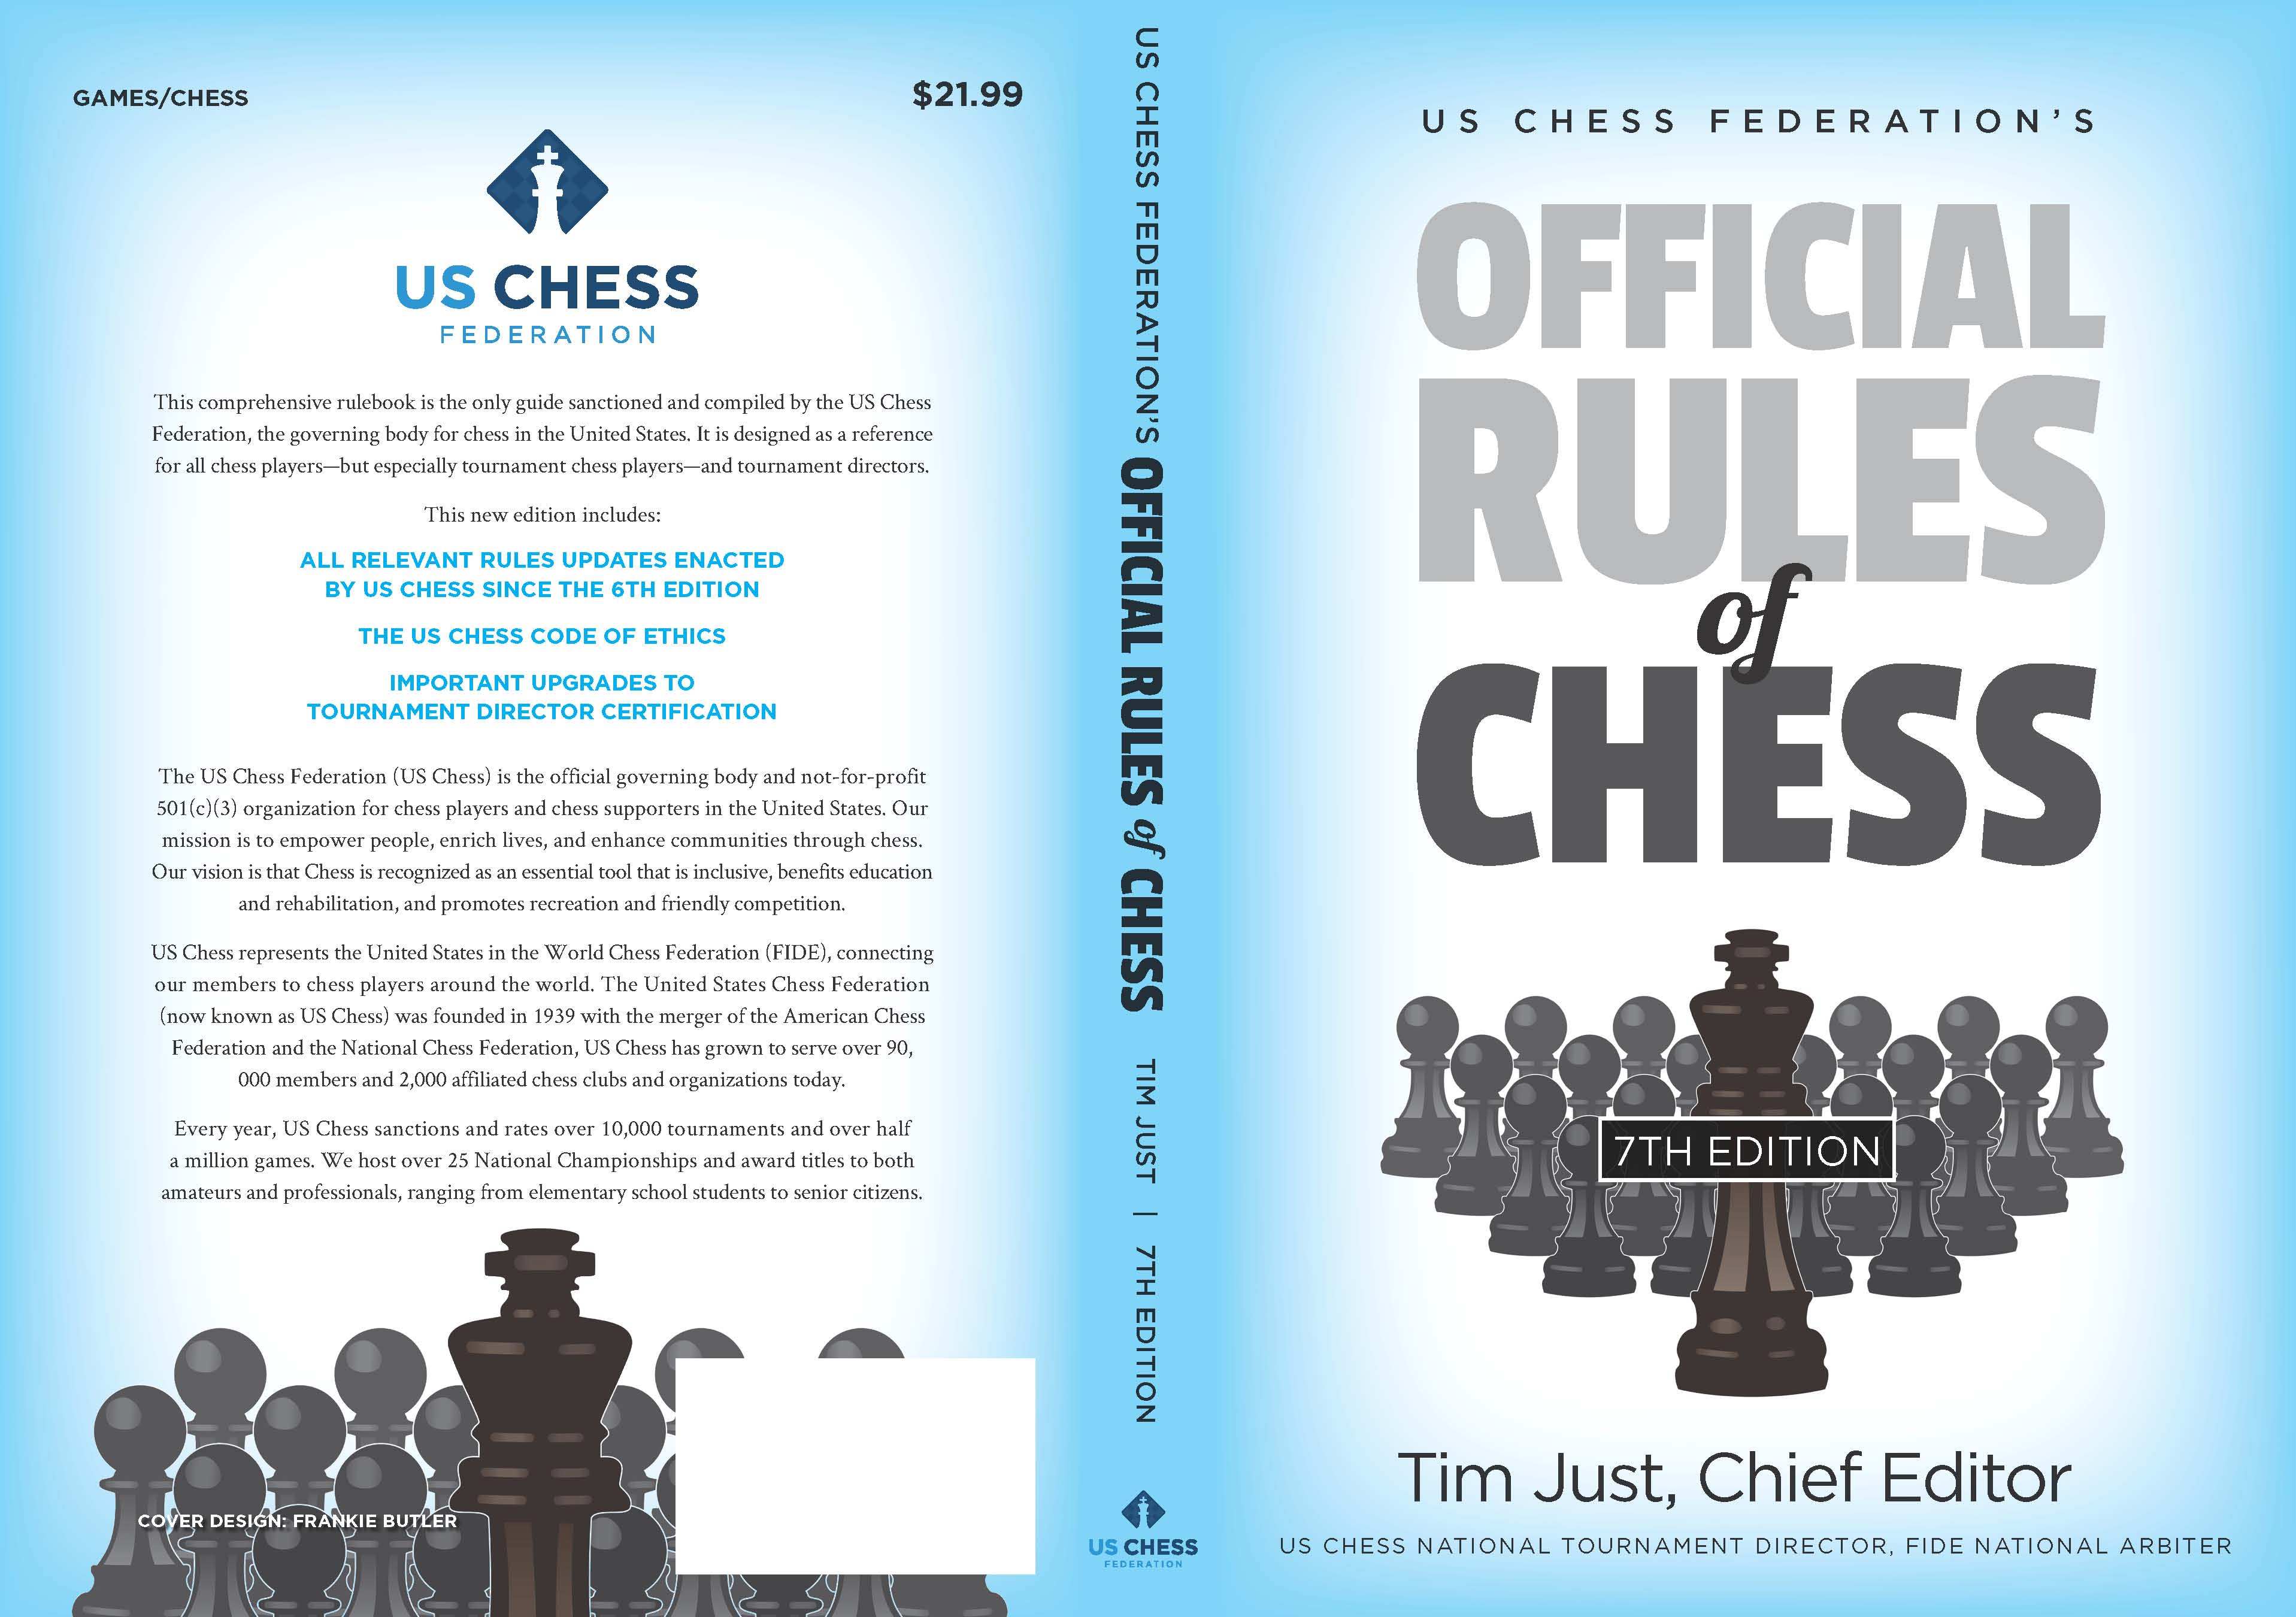 2023 Laws of Chess published